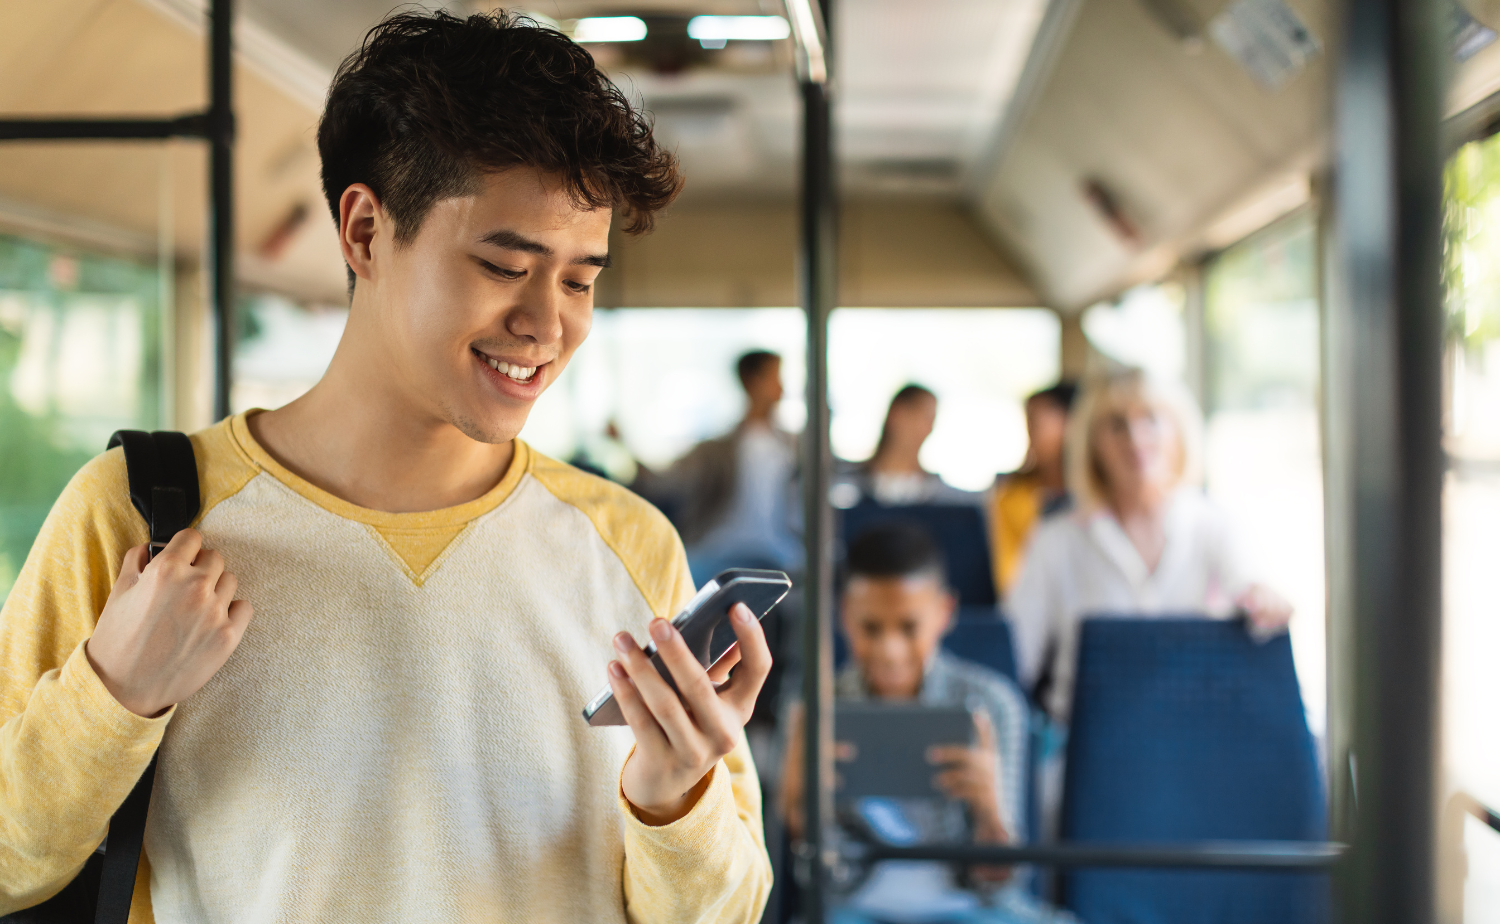 A young man in a yellow and white shirt smiles while looking at his phone on a bus, with other passengers engaged in their own activities in the background, representing connectivity and engagement.